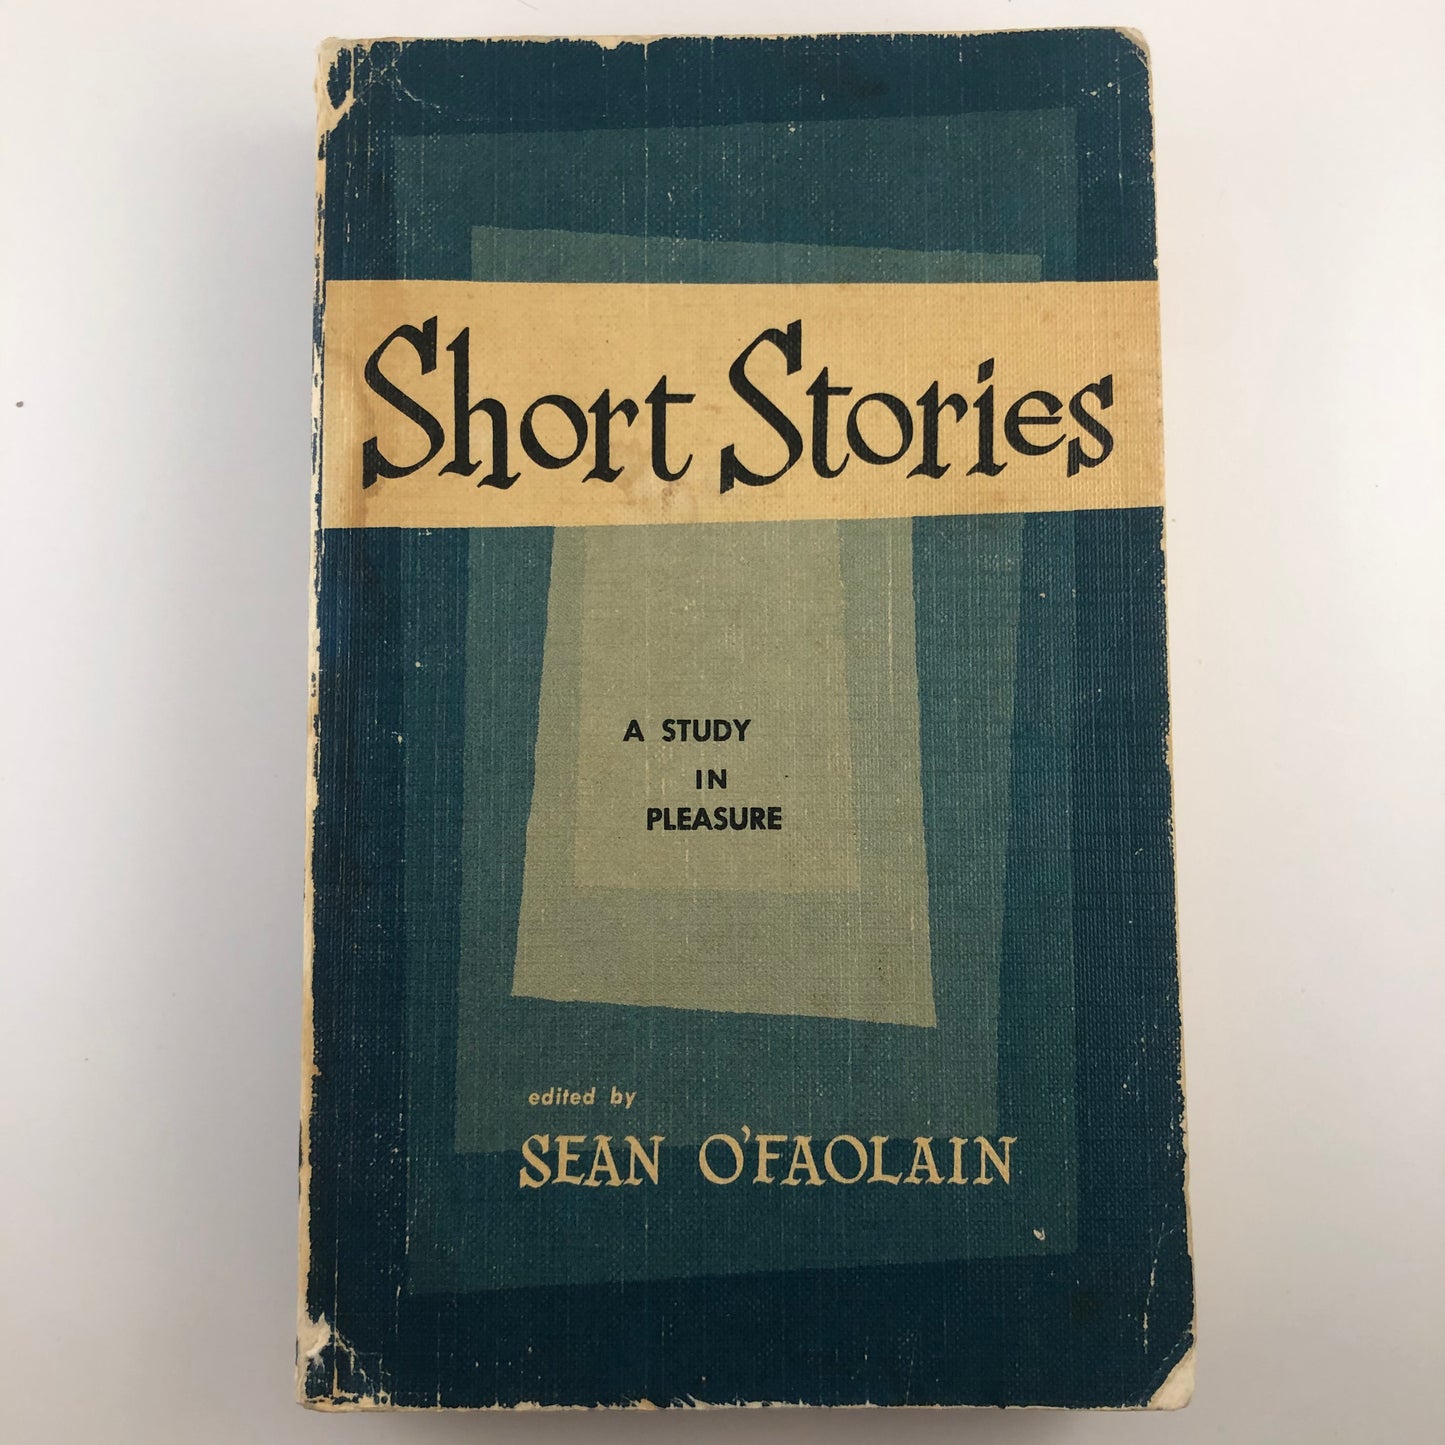 Short Stories: A Study in Pleasure